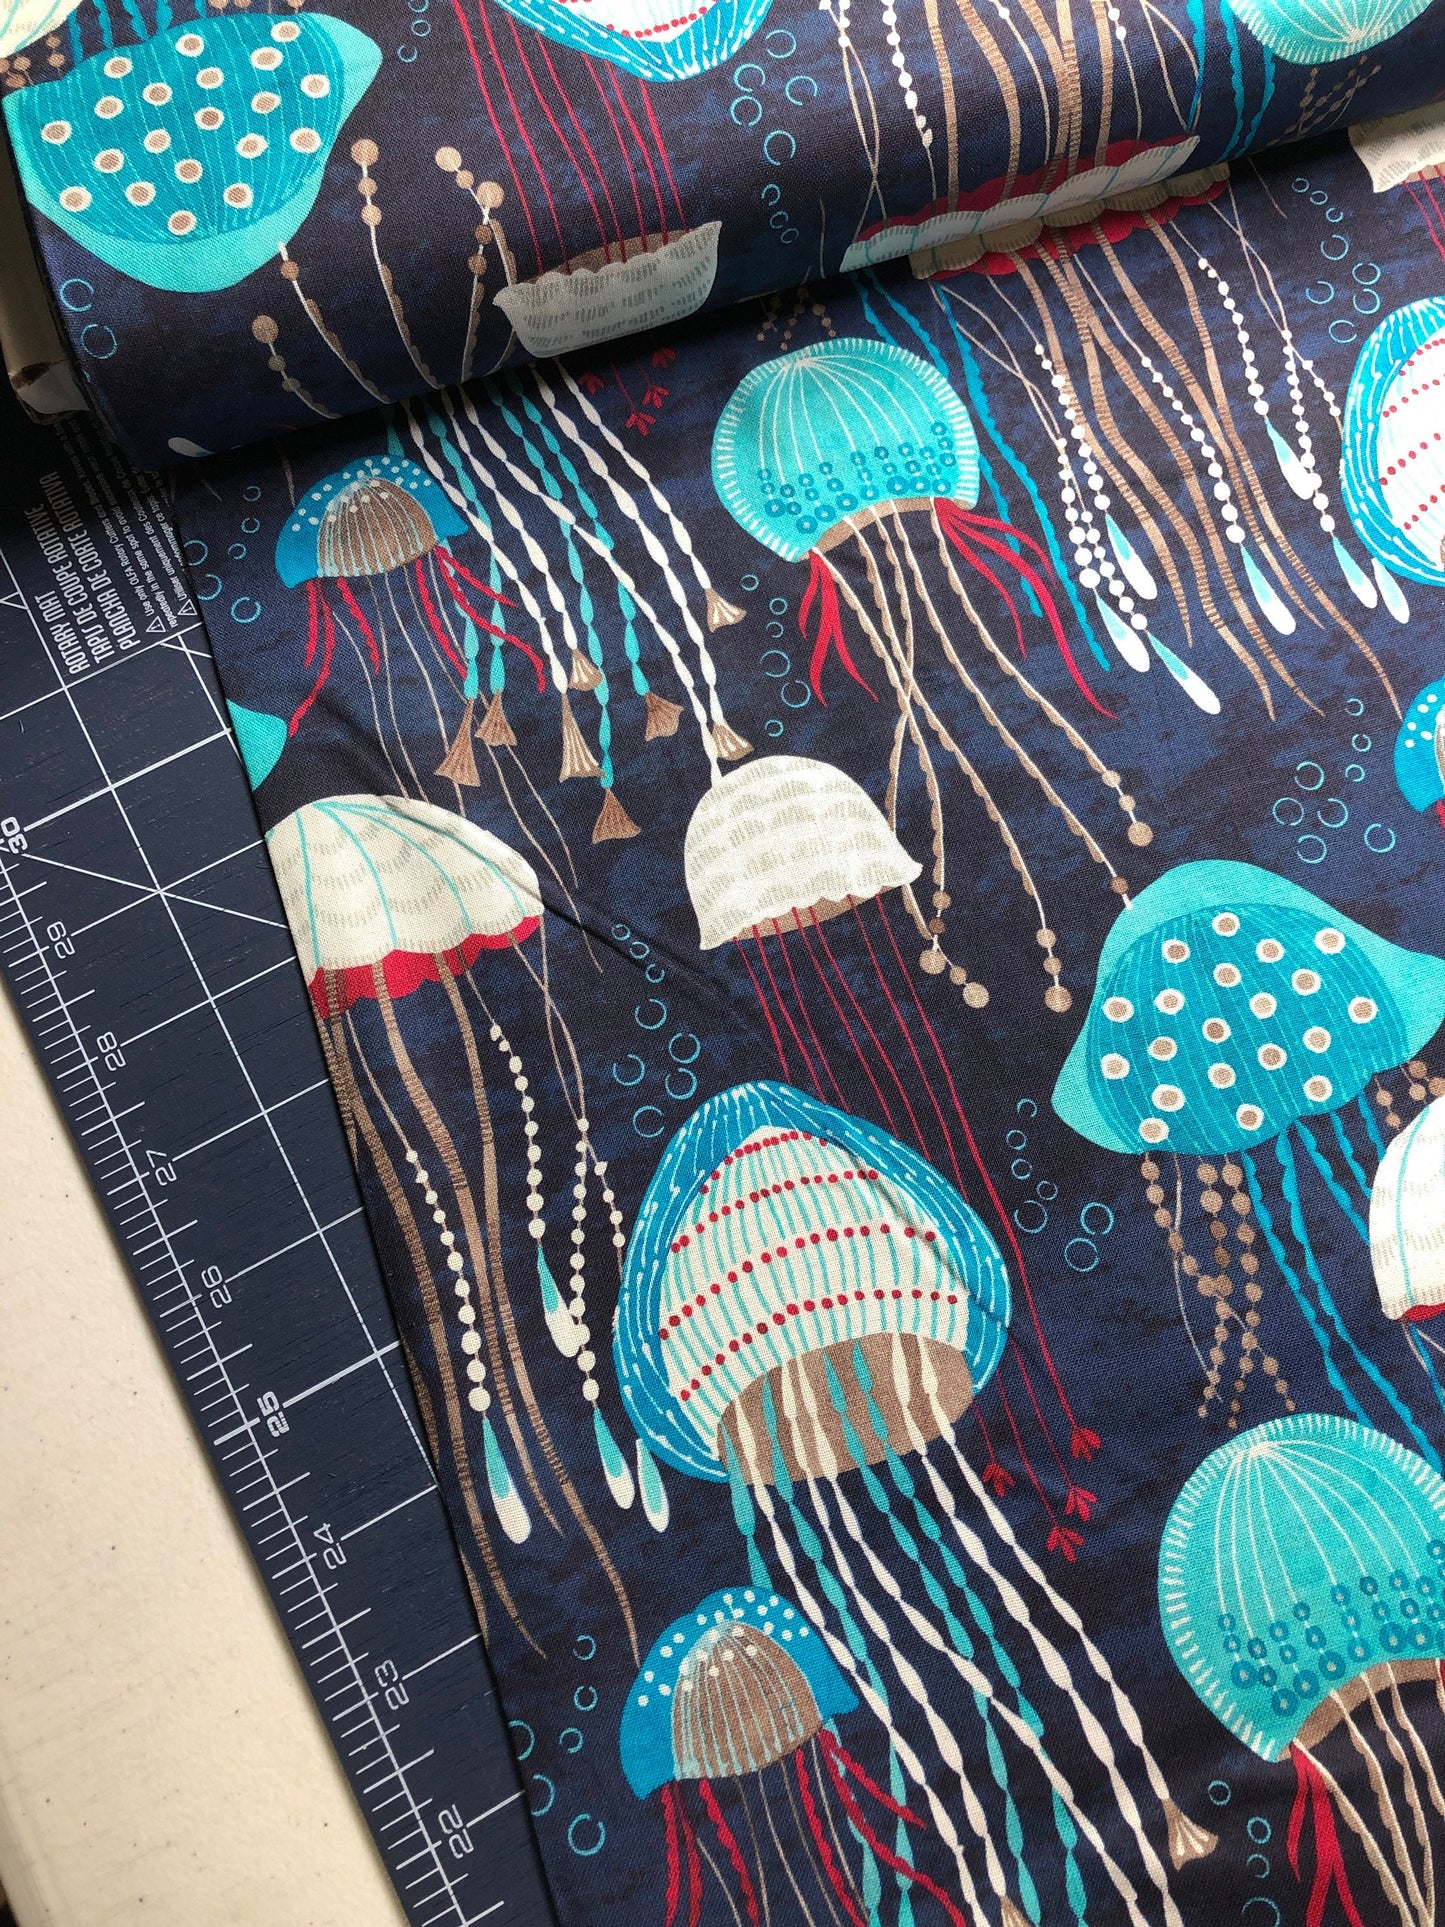 Jolly Jellyfish Navy DCX9954 Michael Miller Fabrics, Fanciful Sea Life, Quilt Fabric, Beach Decor, Cotton Fabric, Fabric By The Yard